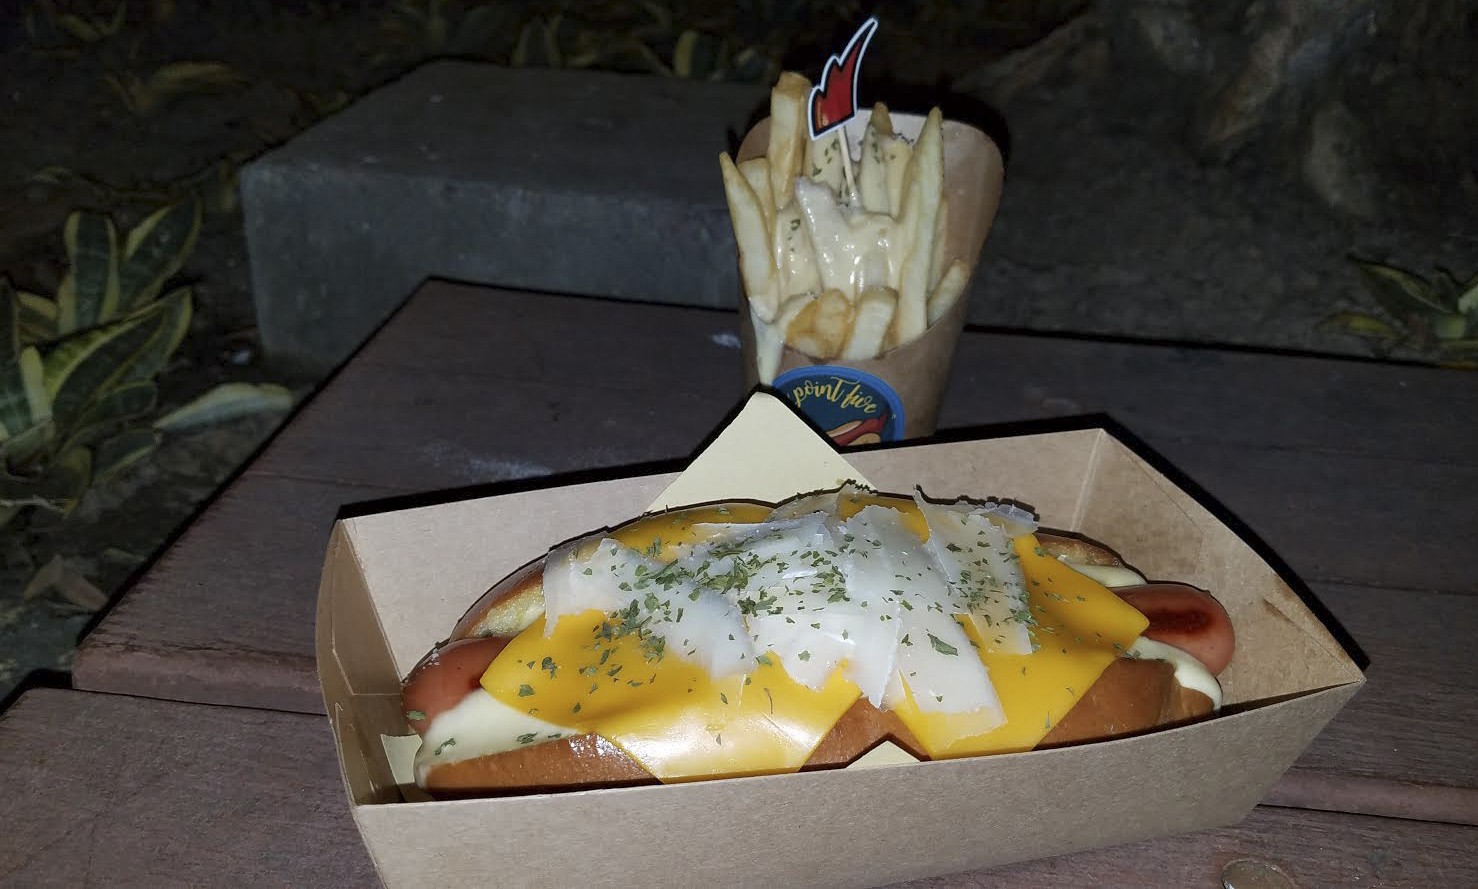 The triple cheese hot dog and fries with cheese sauce at Nine Point Five, Sai Kung, Hong Kong. Photo: SCMP